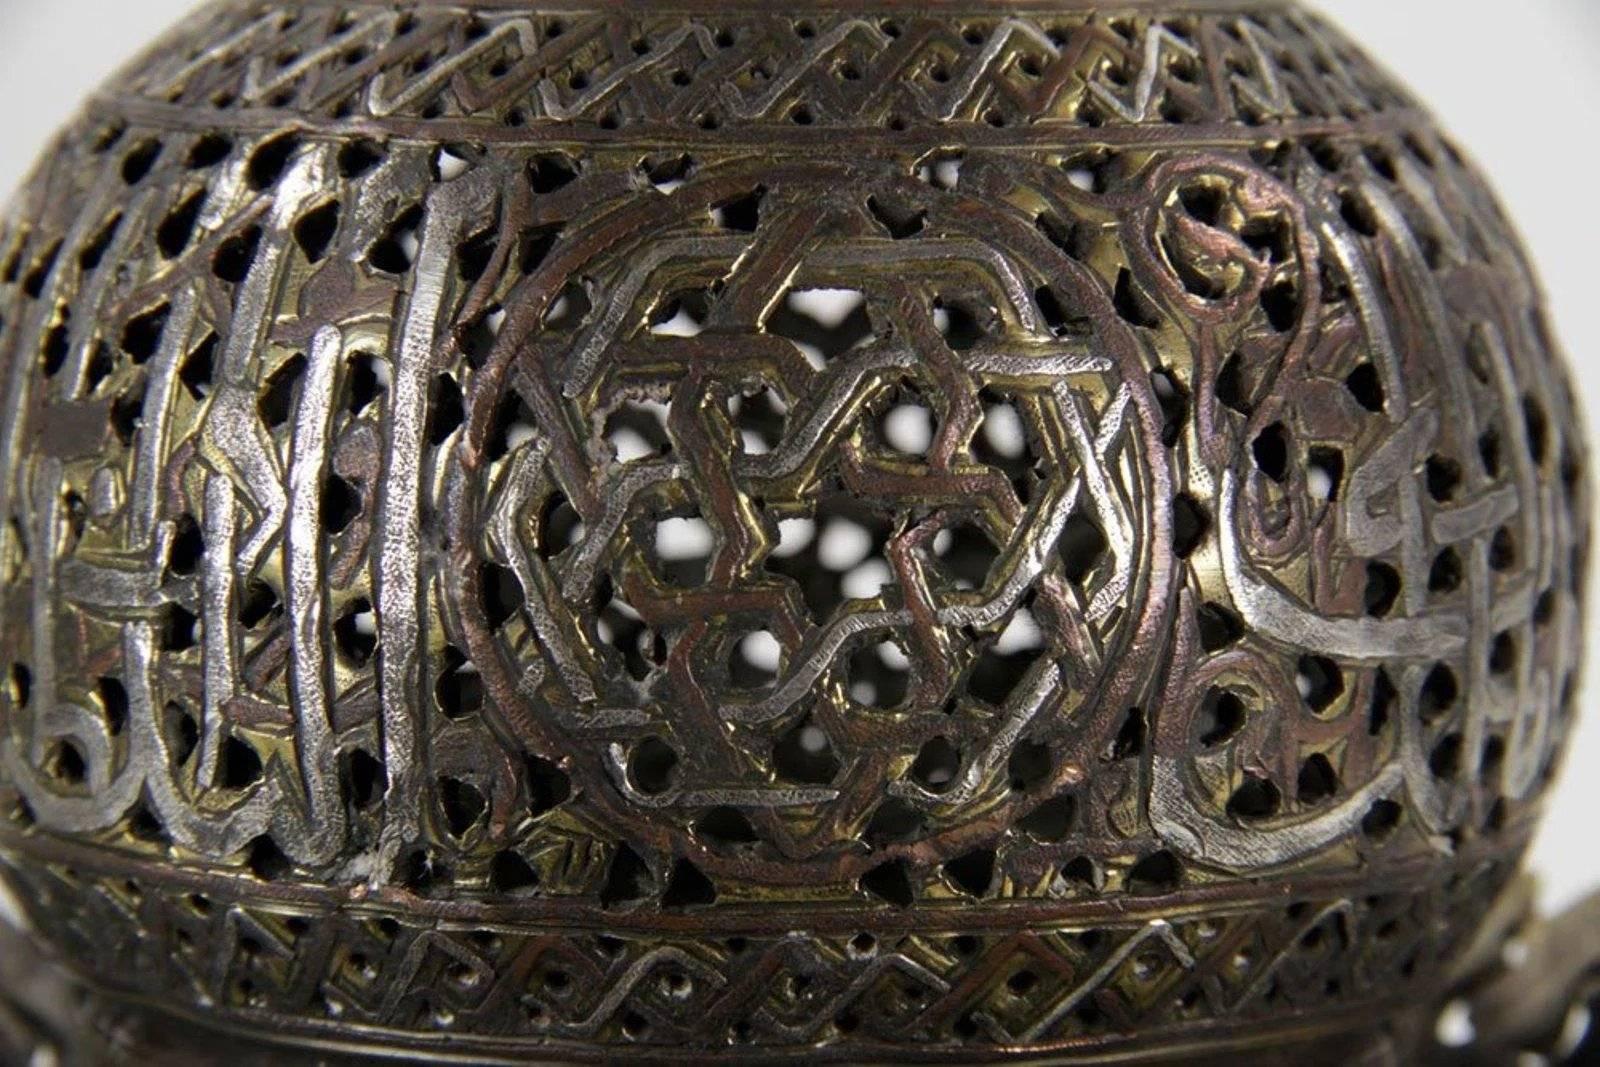 Asian Pair of Middle Eastern Islamic Silver Damascene Inlaid Incense Burners